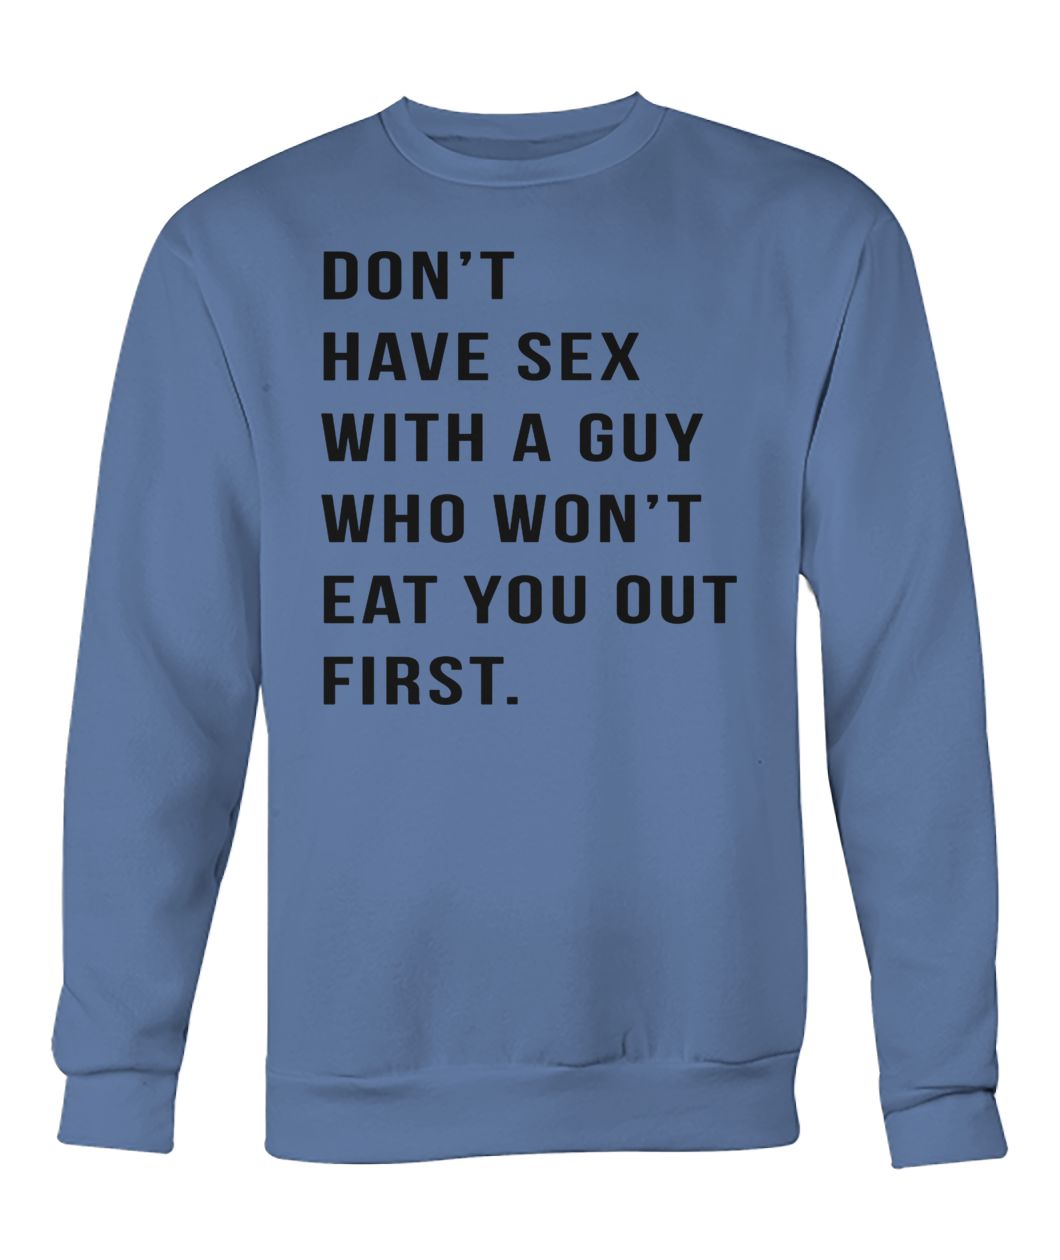 Don't have sex with a guy who won't eat you out first crew neck sweatshirt